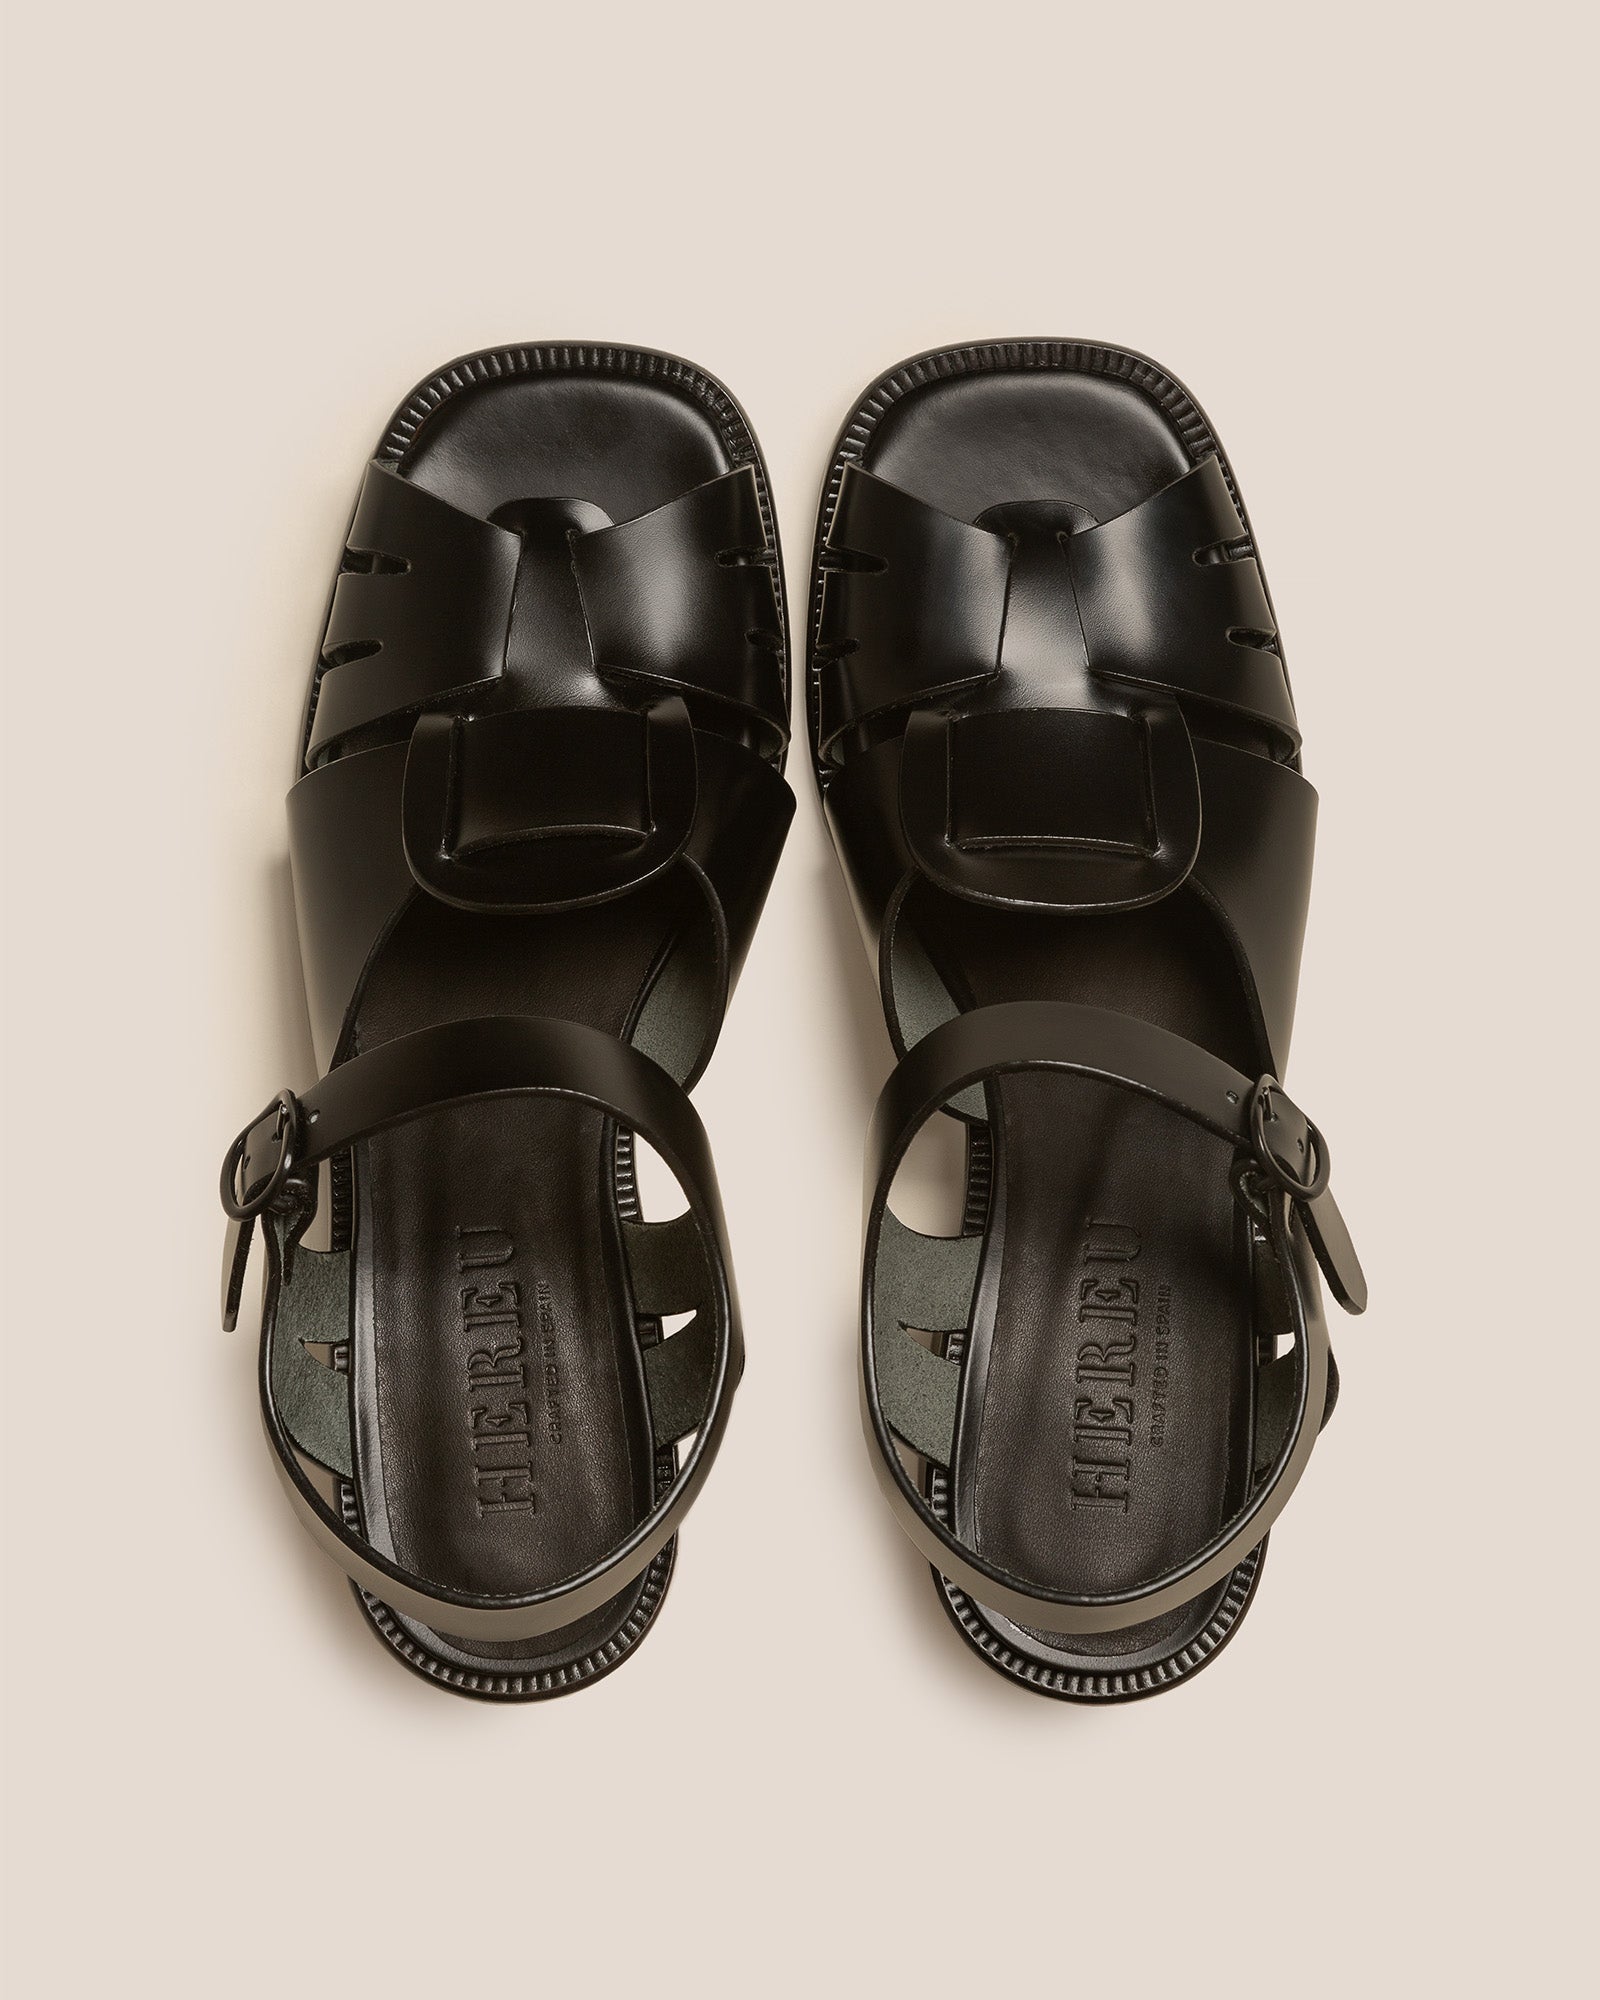 Buy Heels County Black Men's Faux Leather Sandals for Mens Latest - 07 UK  at Amazon.in